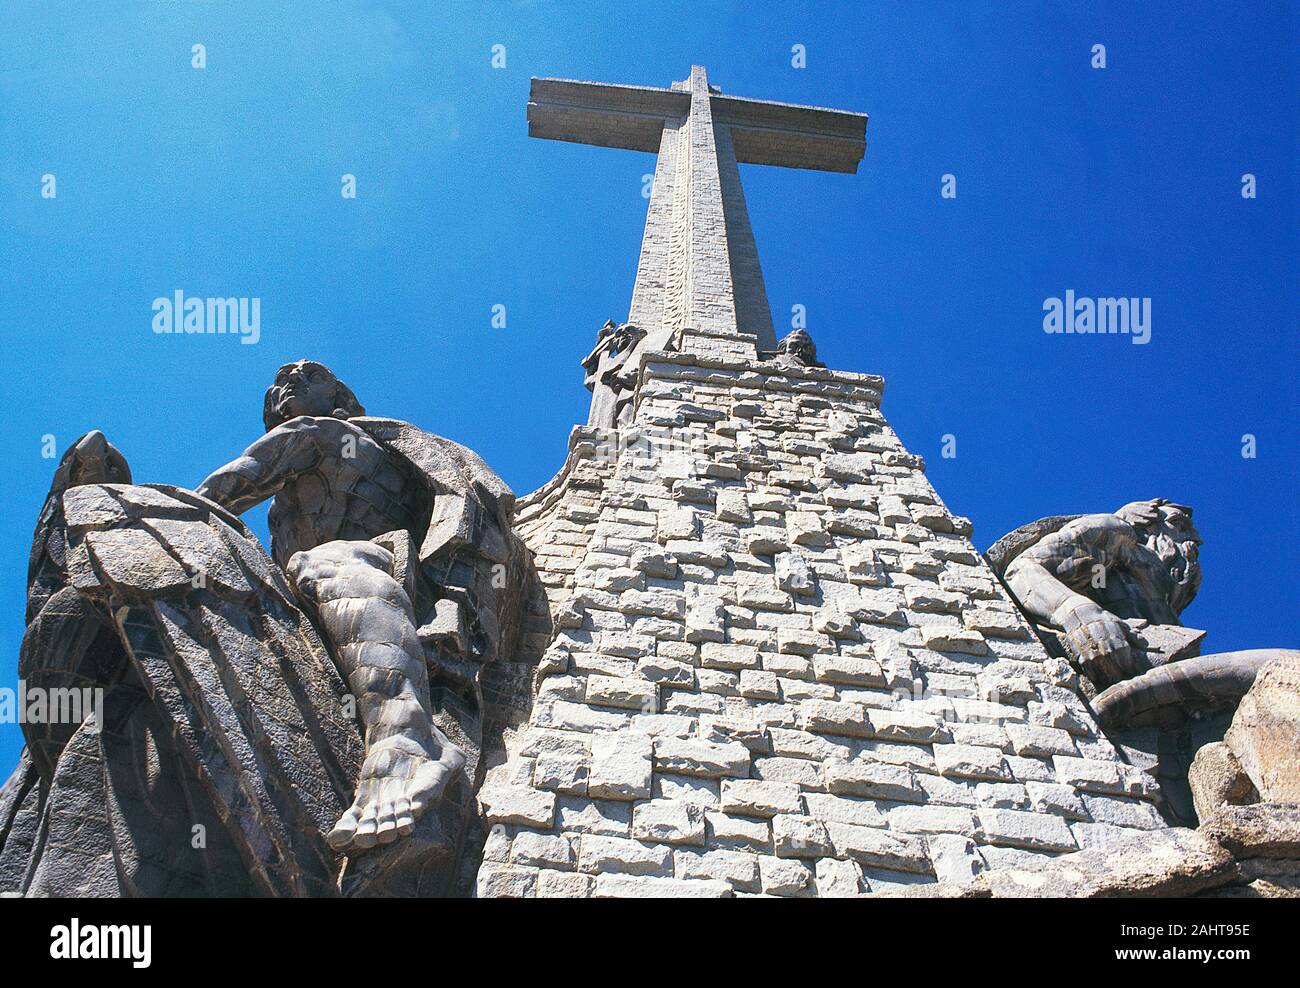 Cross, view from below. Valle de los Caidos, Madrid province, Spain. Stock Photo